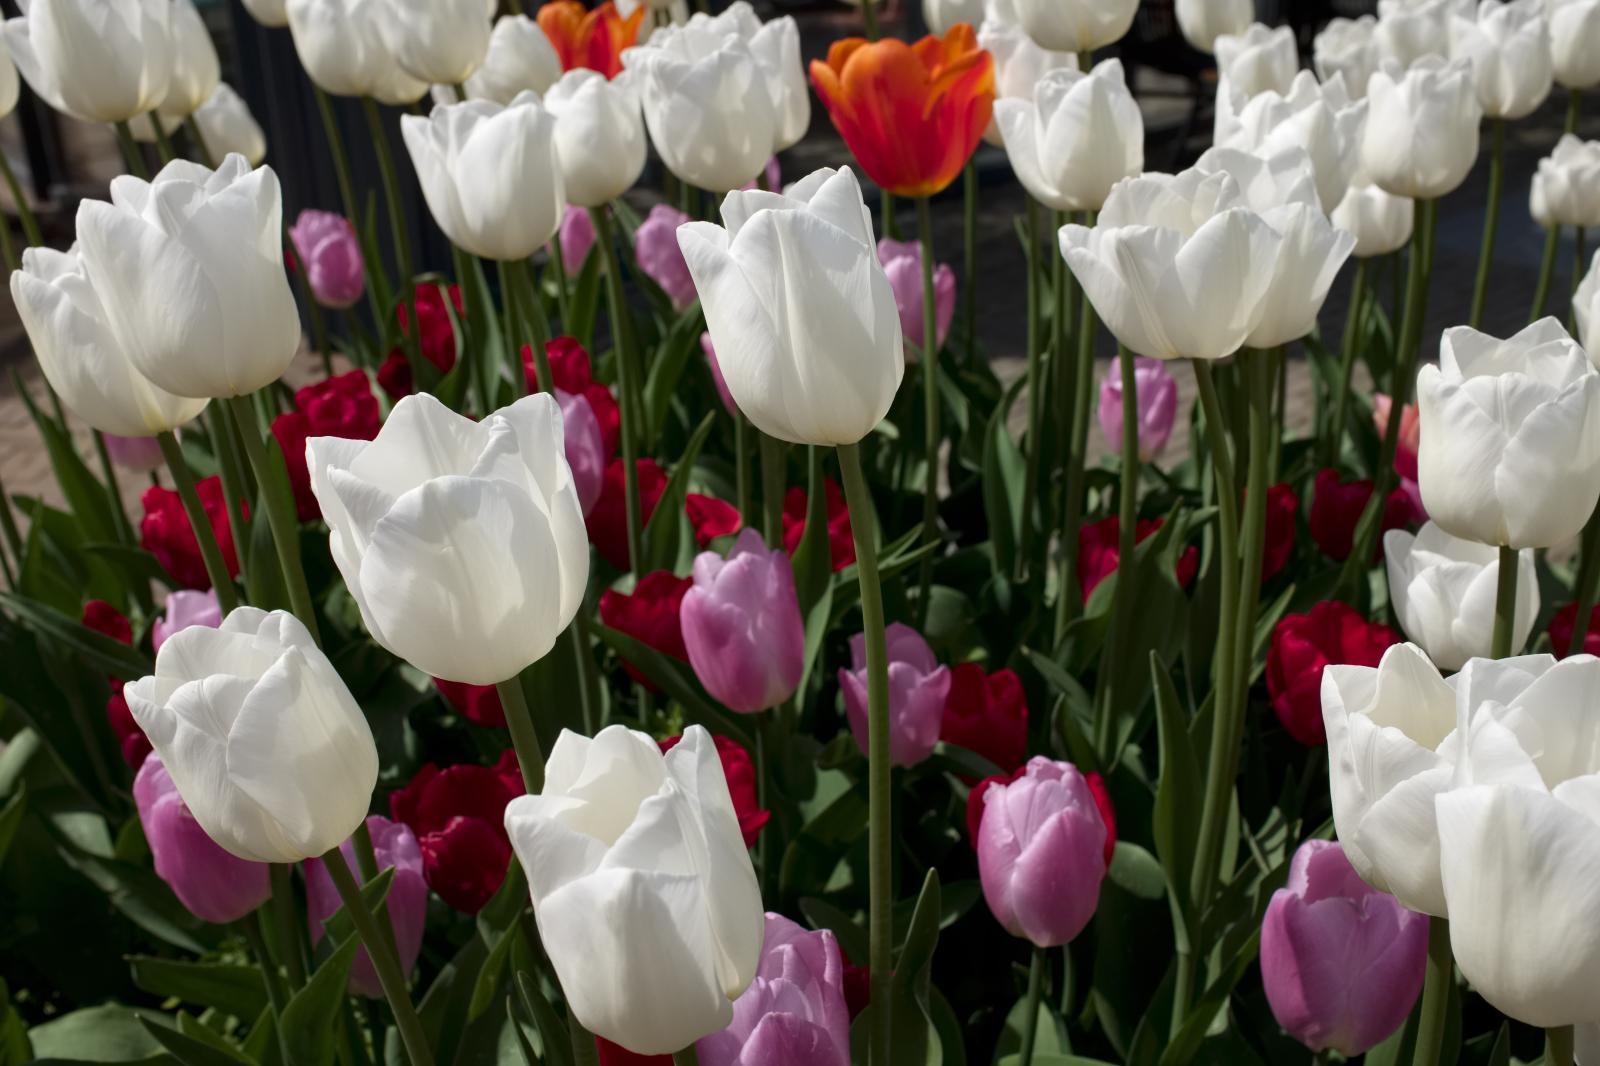 Tulips | Buy this image